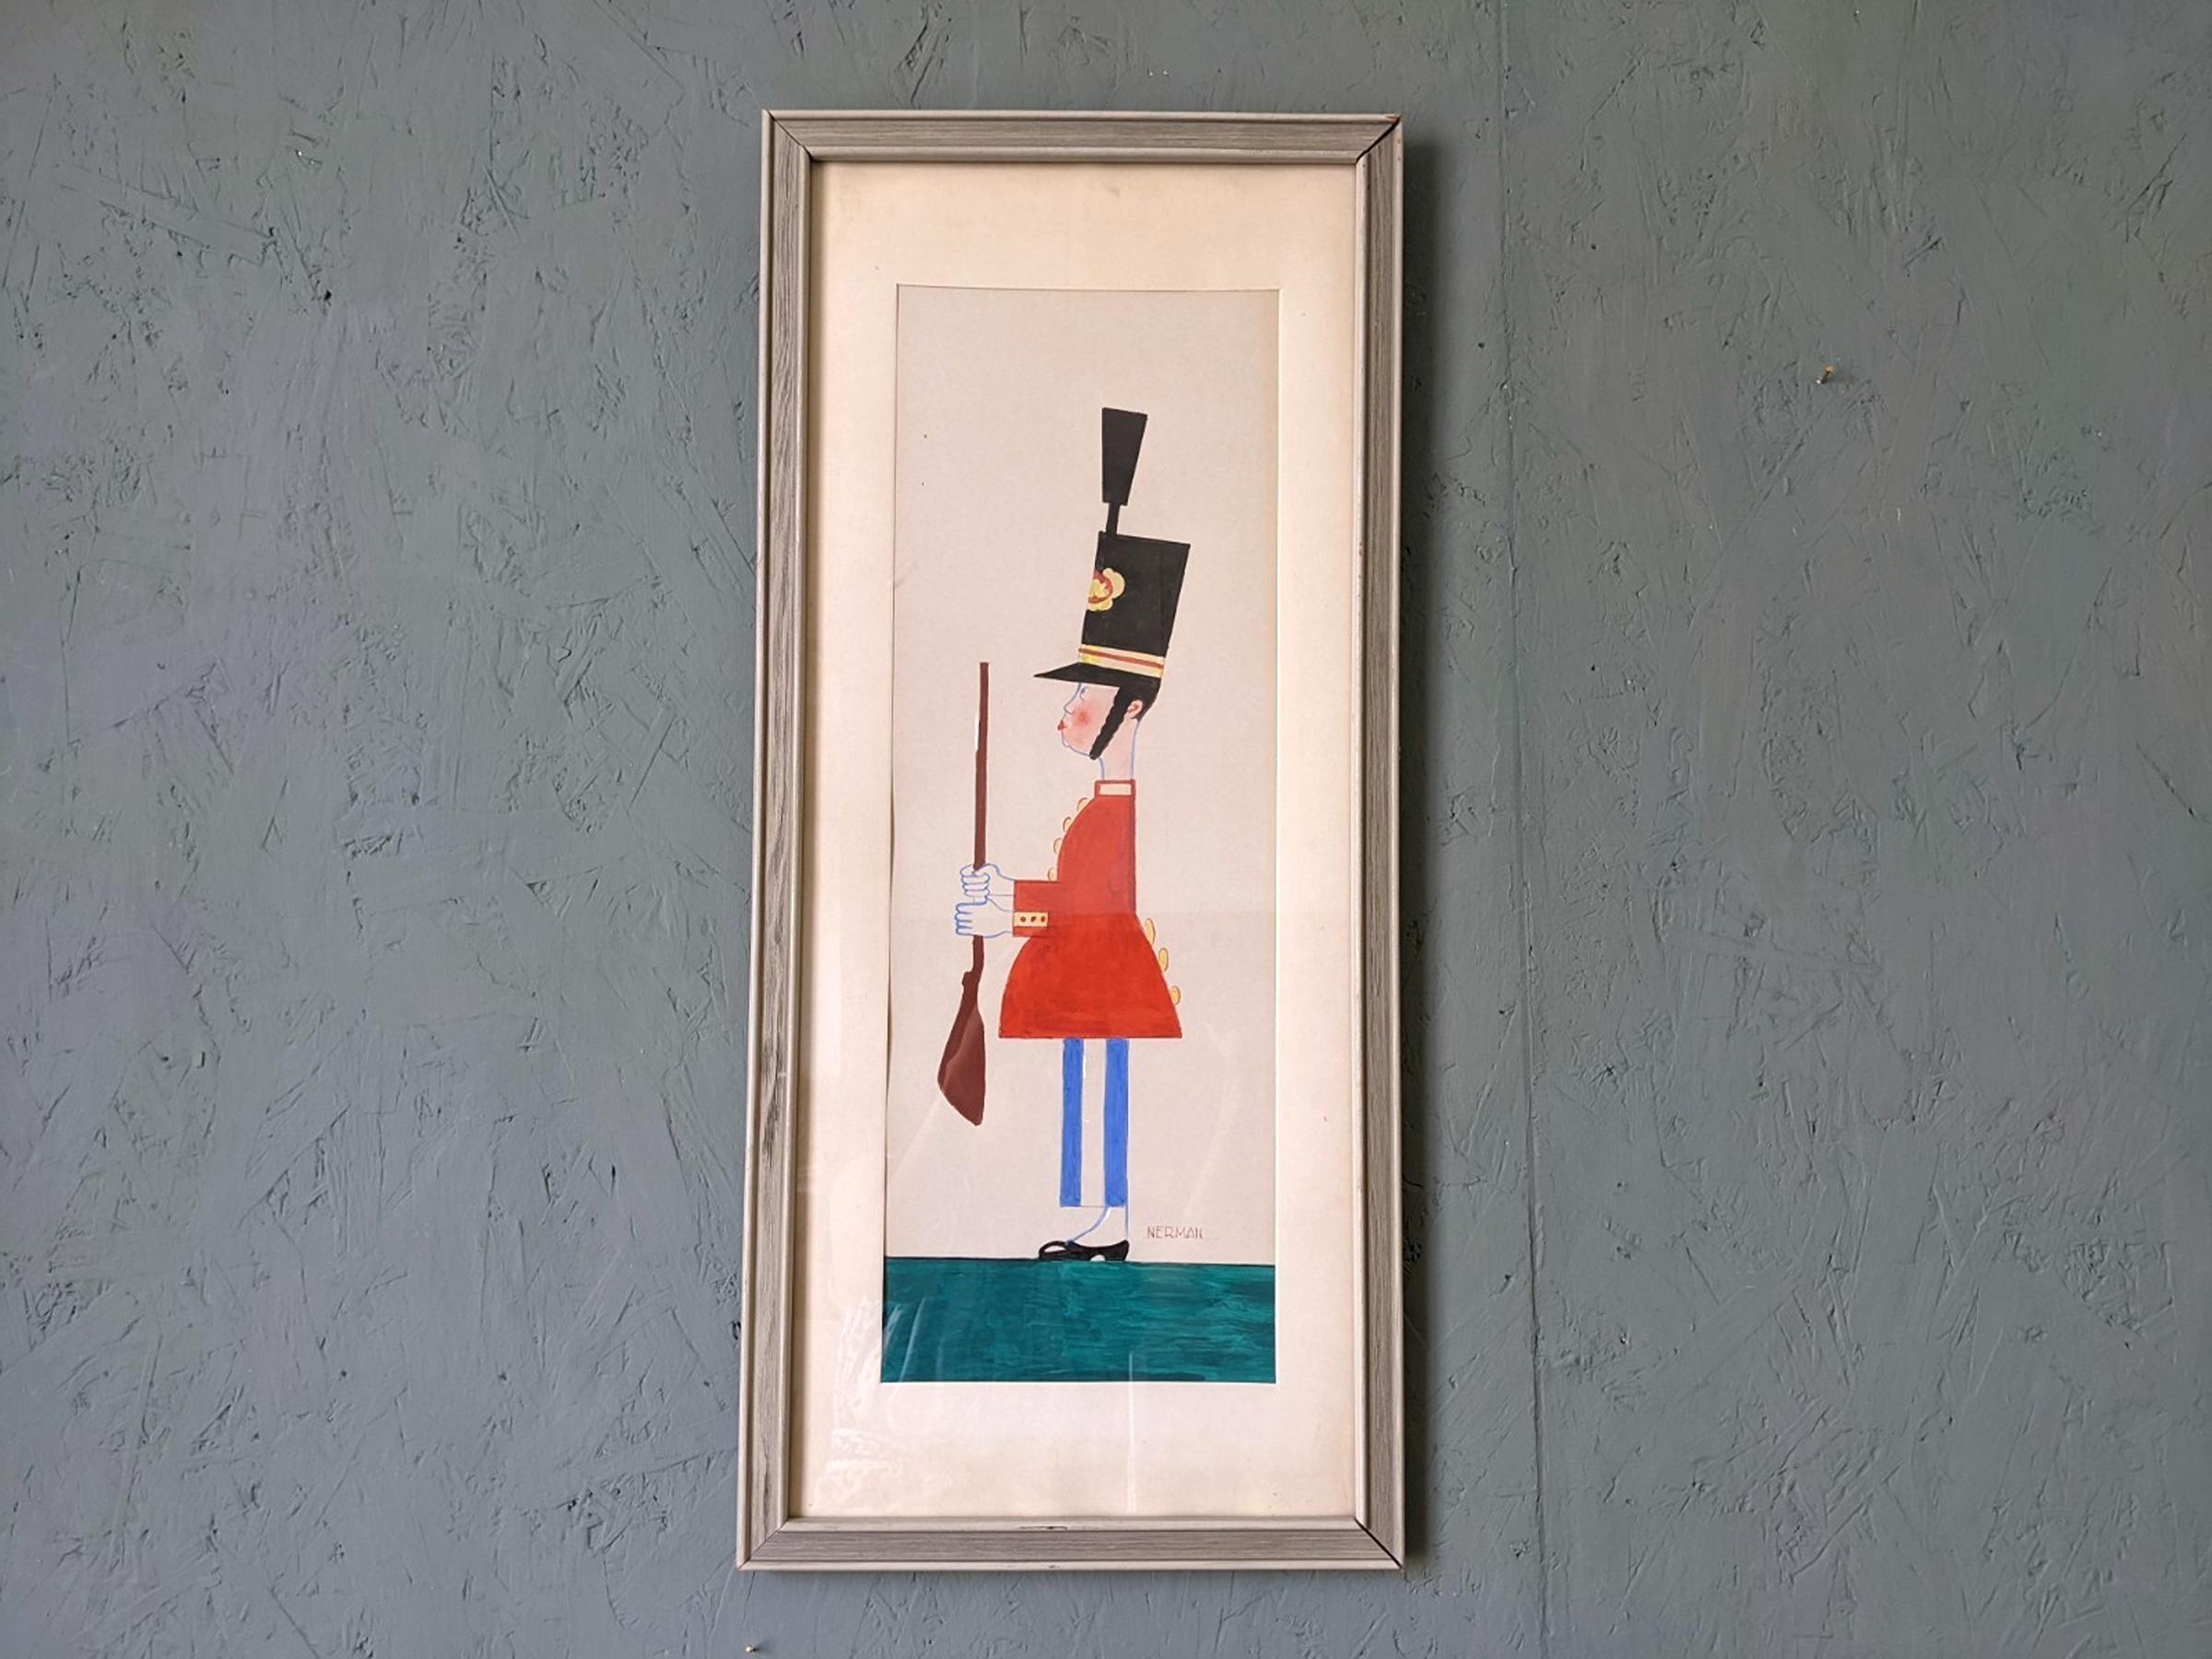 THE ROYAL GUARD
Size: 63 x 29 cm (including frame)
Watercolor & Gouache on Paper

A small yet impactful watercolour and gouache figurative composition of an upright figure of a royal guard, depicted in a side profile view.

The subject is dressed